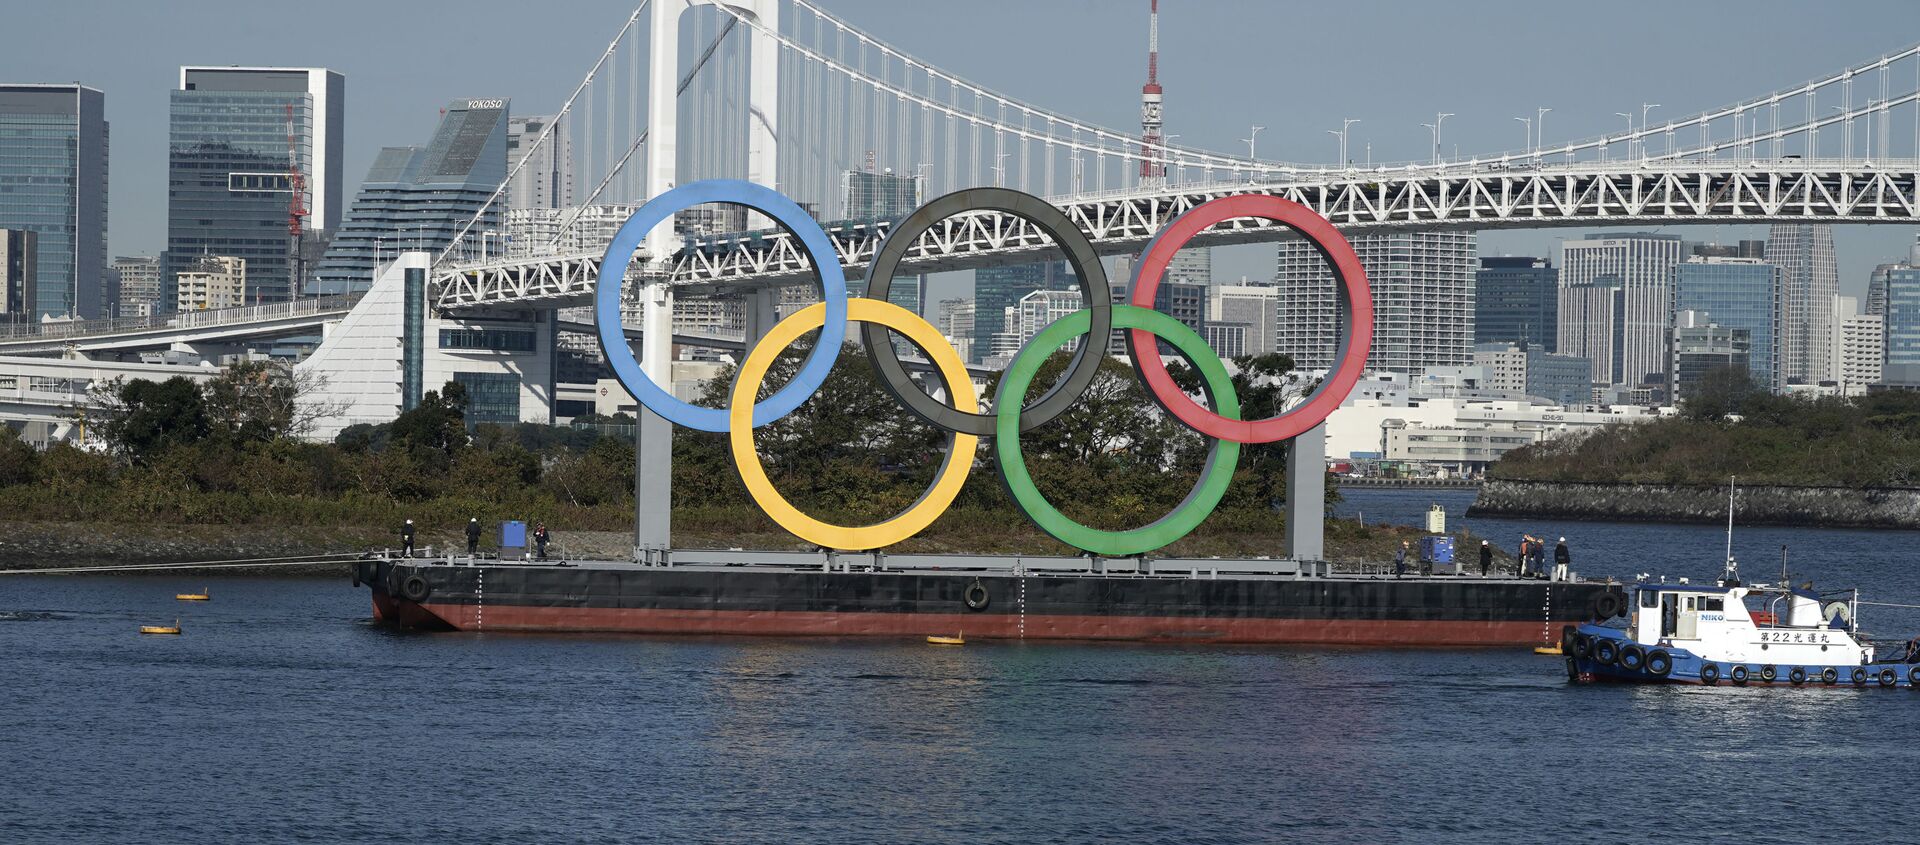 The Olympic Symbol is reinstalled after it was taken down for maintenance ahead of the postponed Tokyo 2020 Olympics in the Odaiba section Tuesday, Dec. 1, 2020, in Tokyo. - Sputnik International, 1920, 14.04.2021